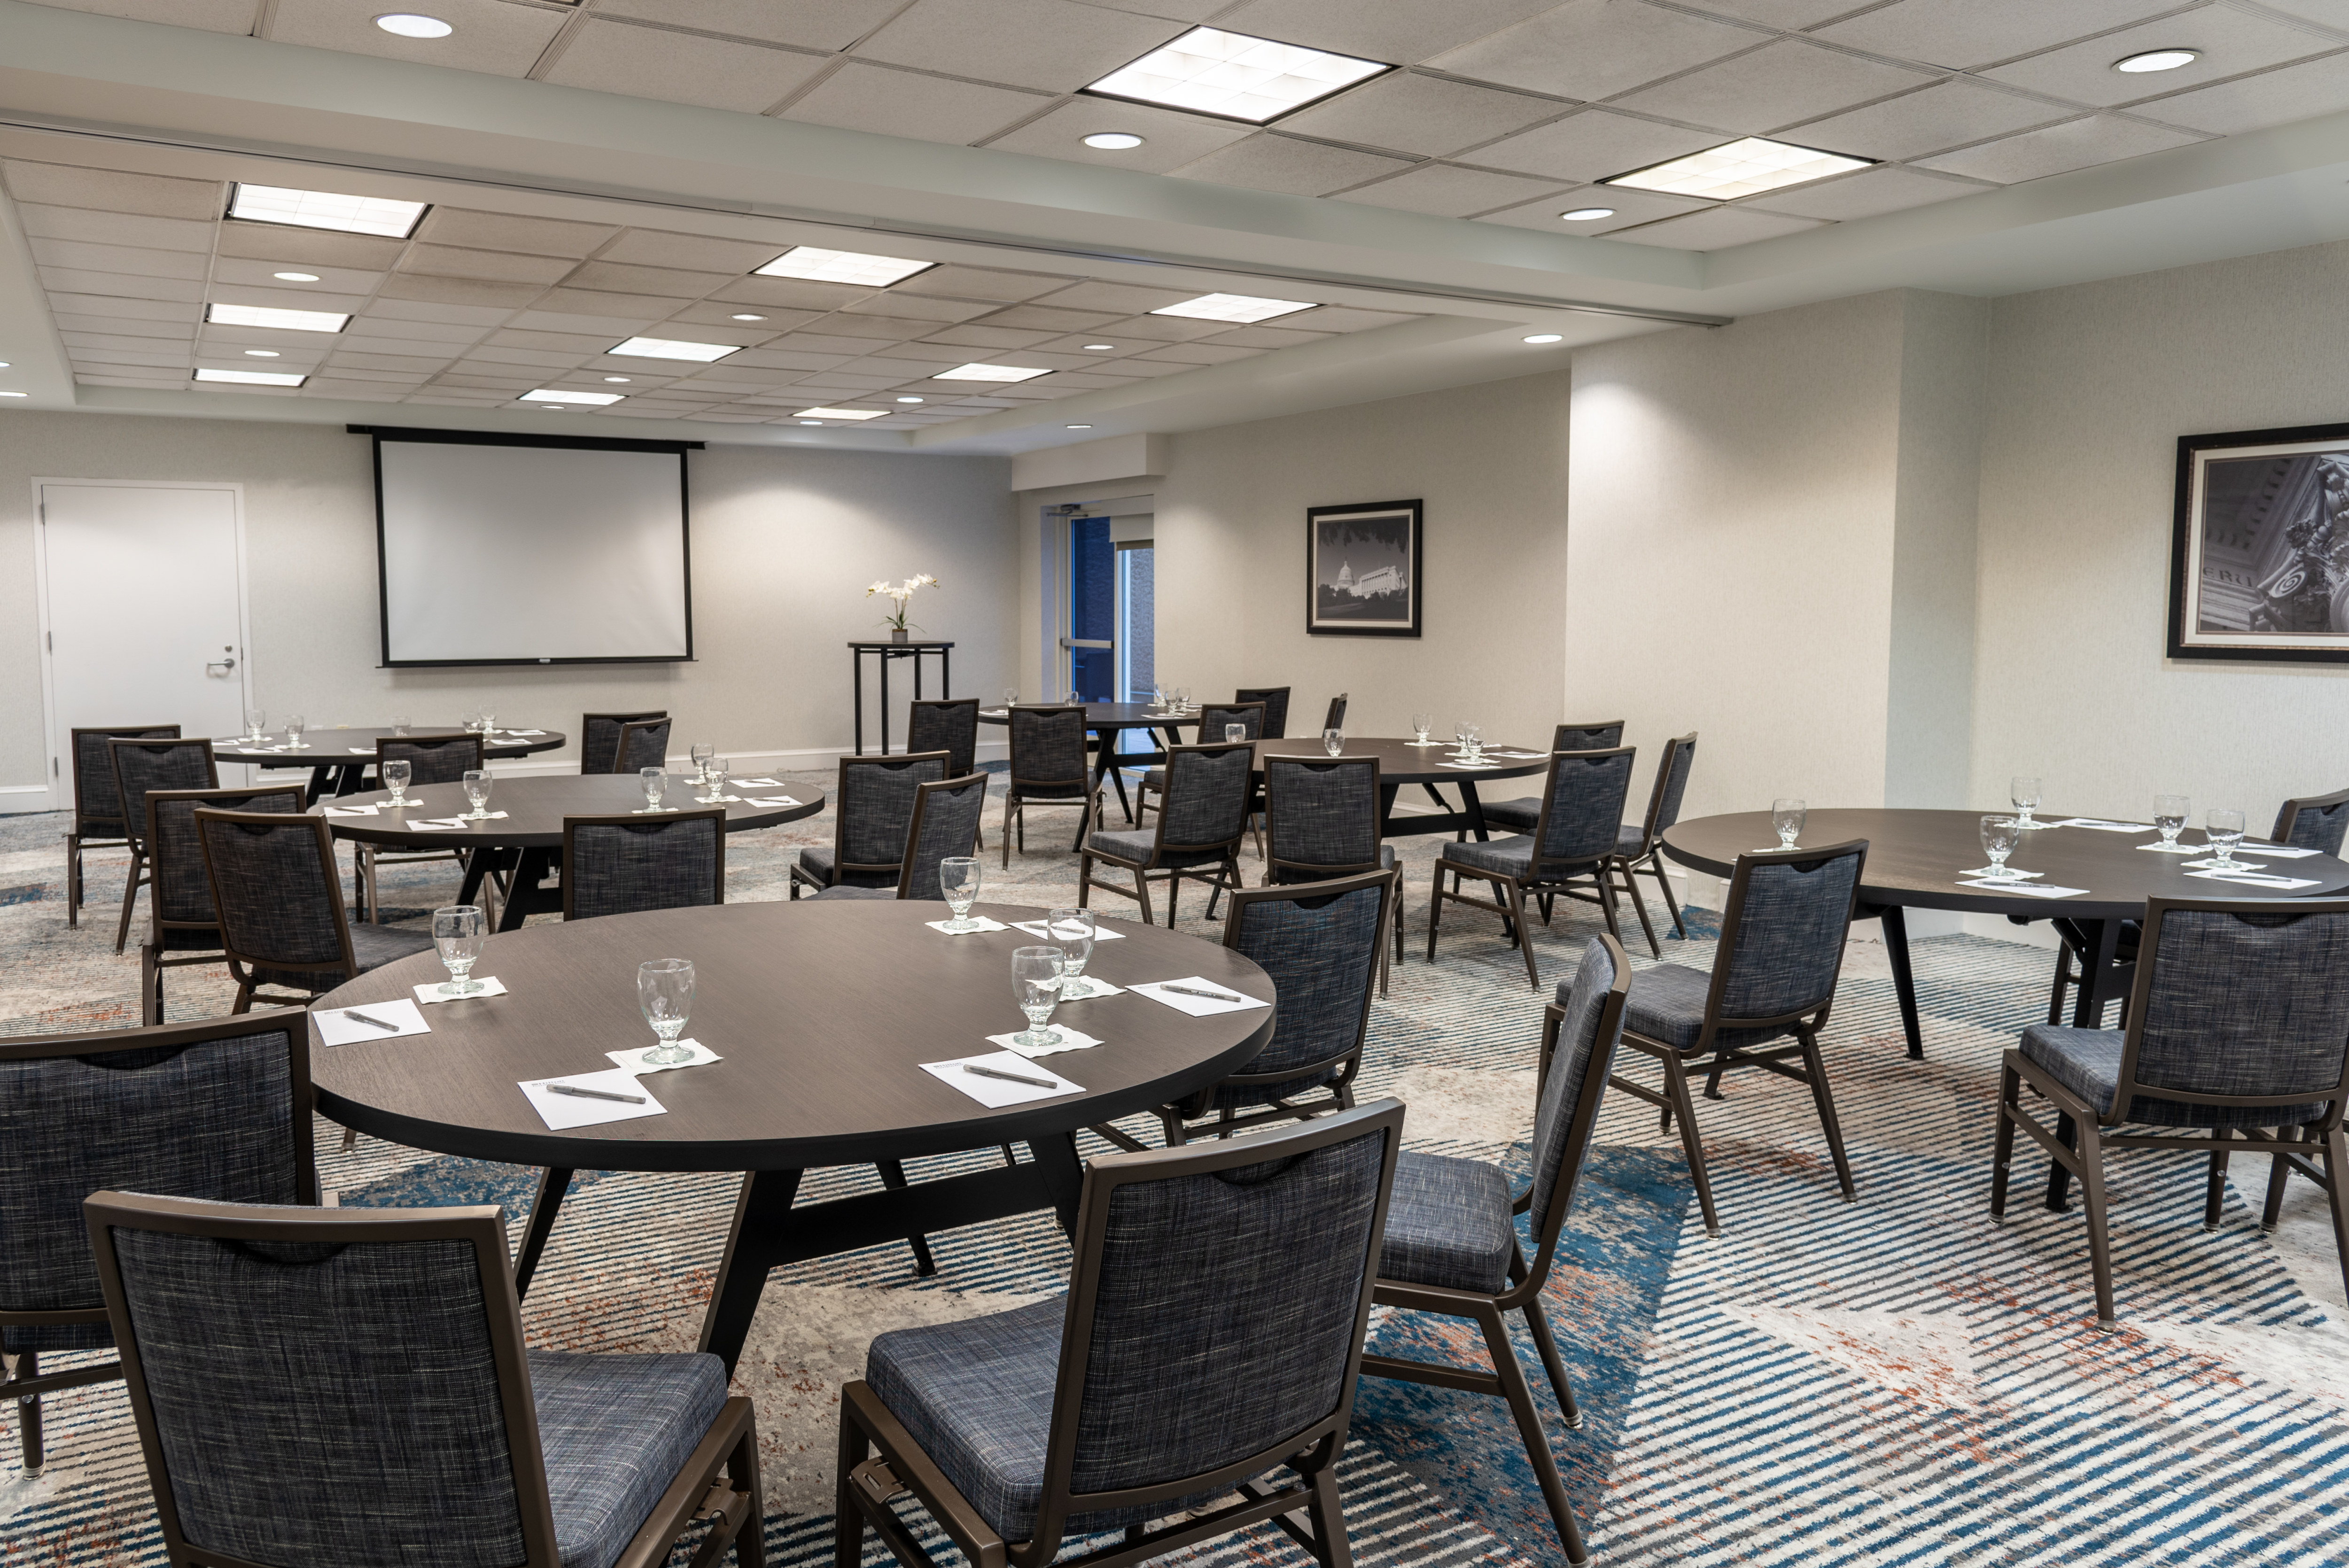 Meeting Room With Round Tables